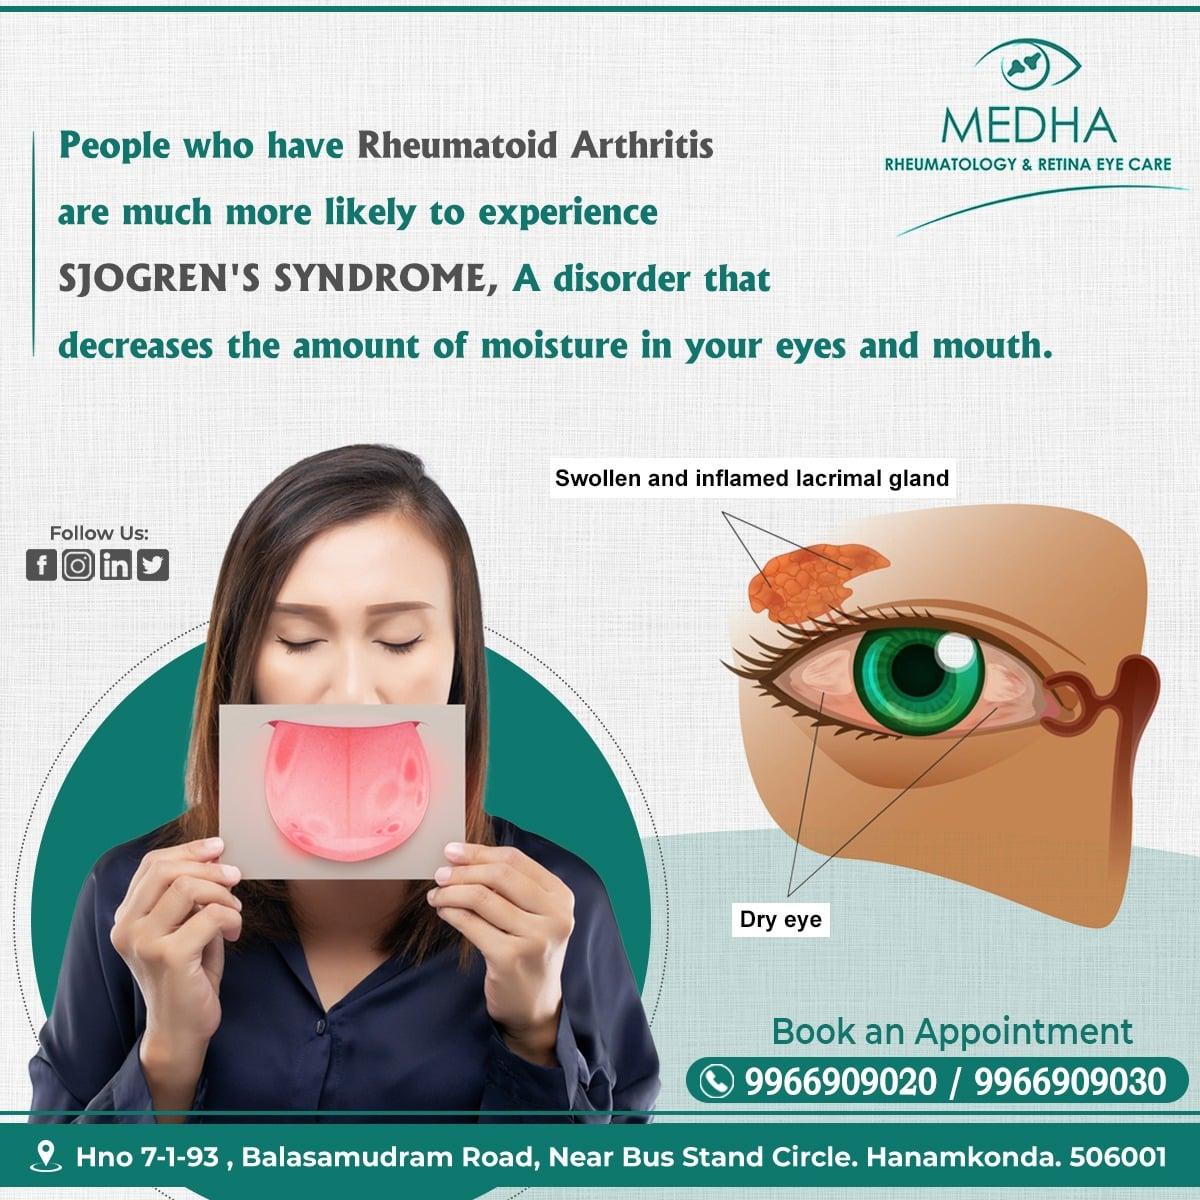 An immune system disorder characterized by dry eyes and dry mouth.